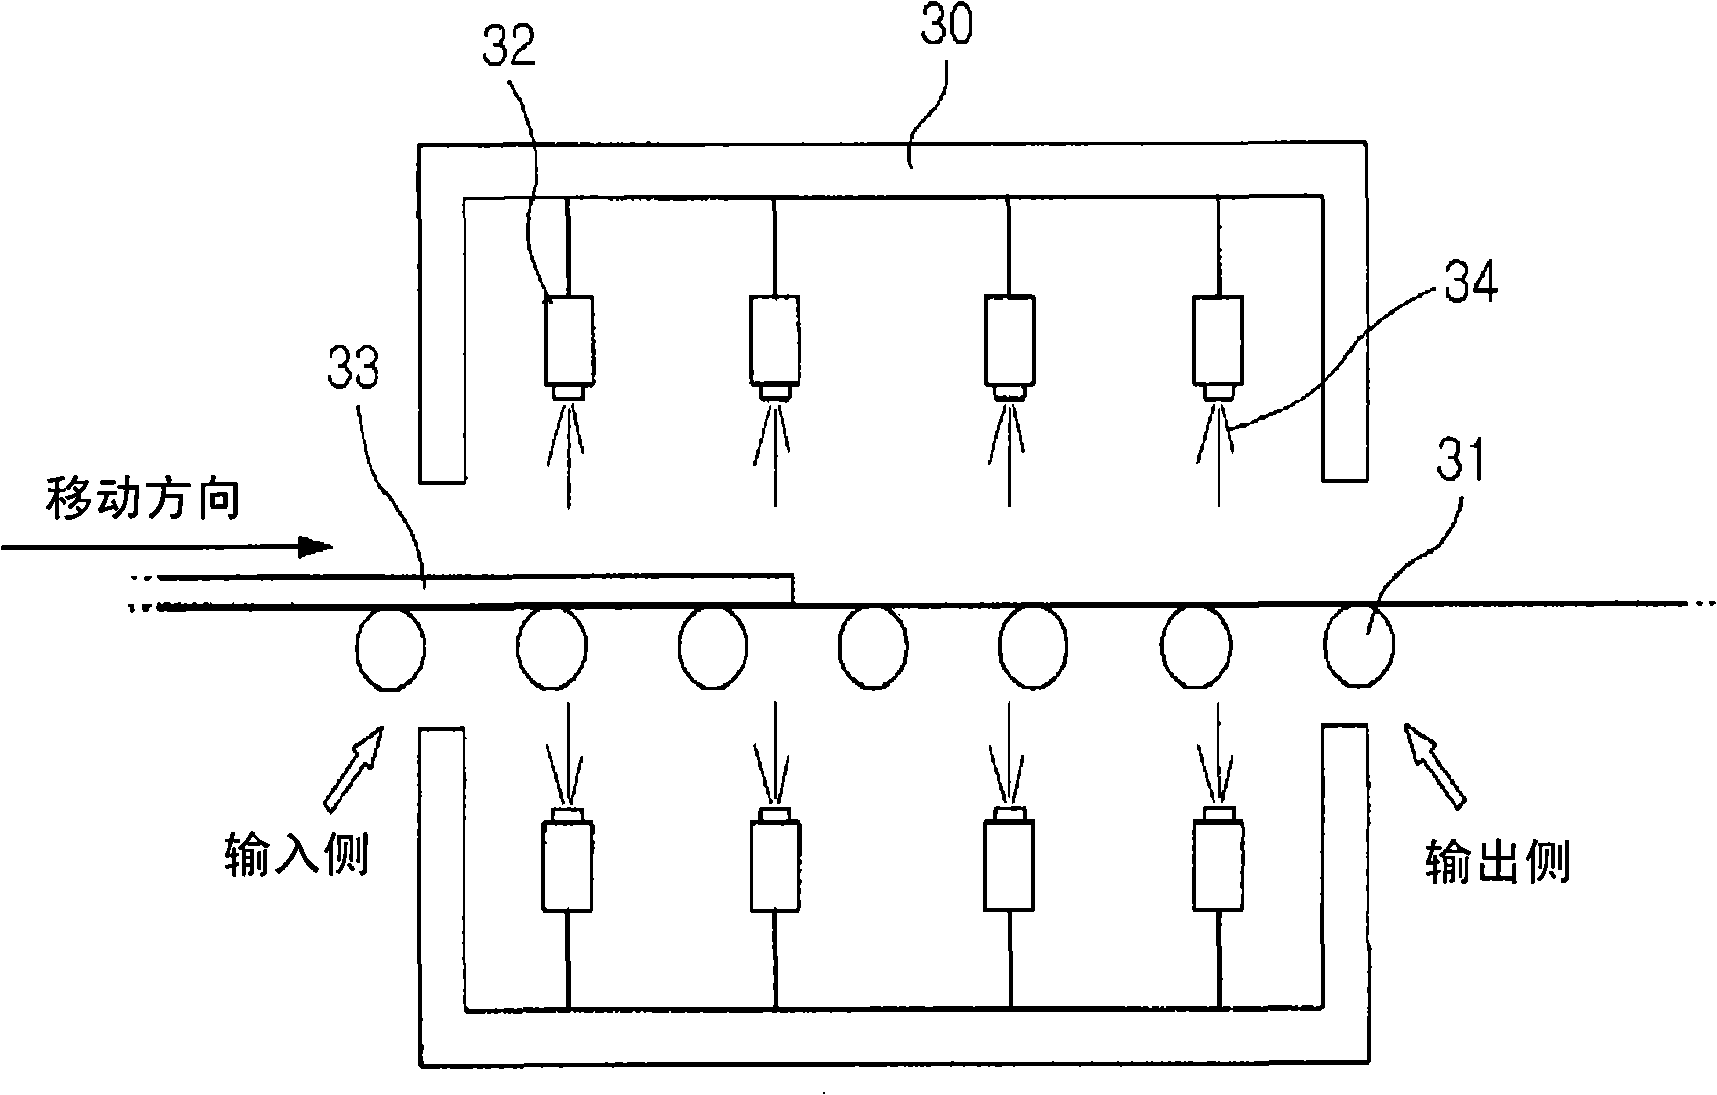 On-line determination device of transformation ratio for metallic materials